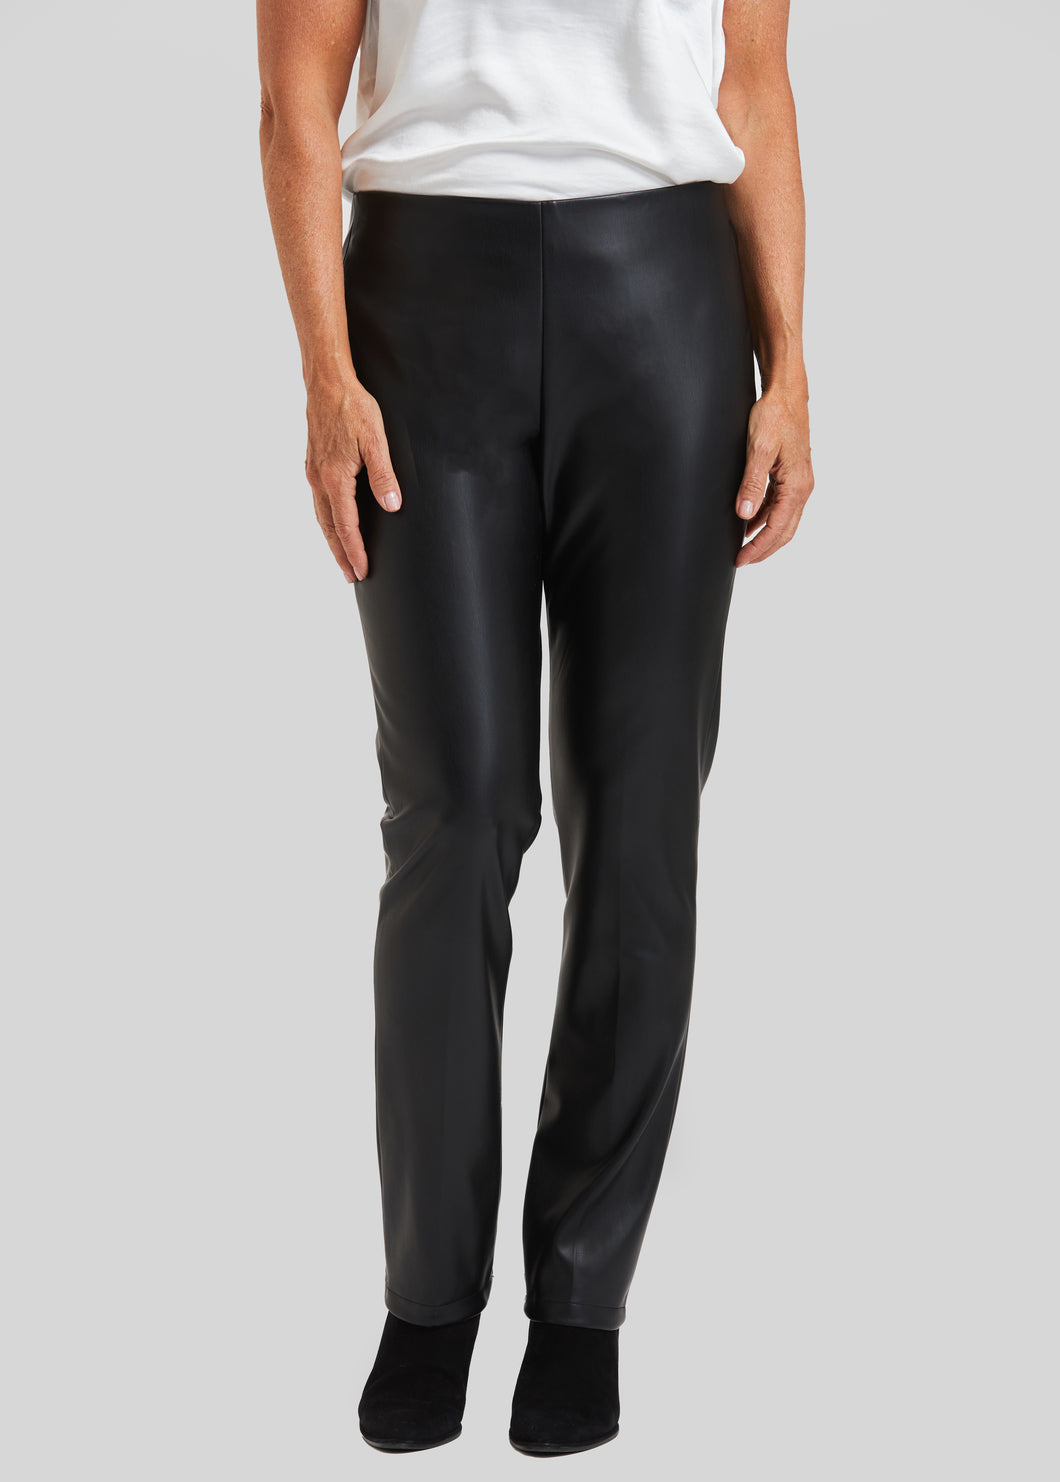 Men's Black Leather Pants | Leather Straight Pants | Leather Trousers -  Casual Men's - Aliexpress